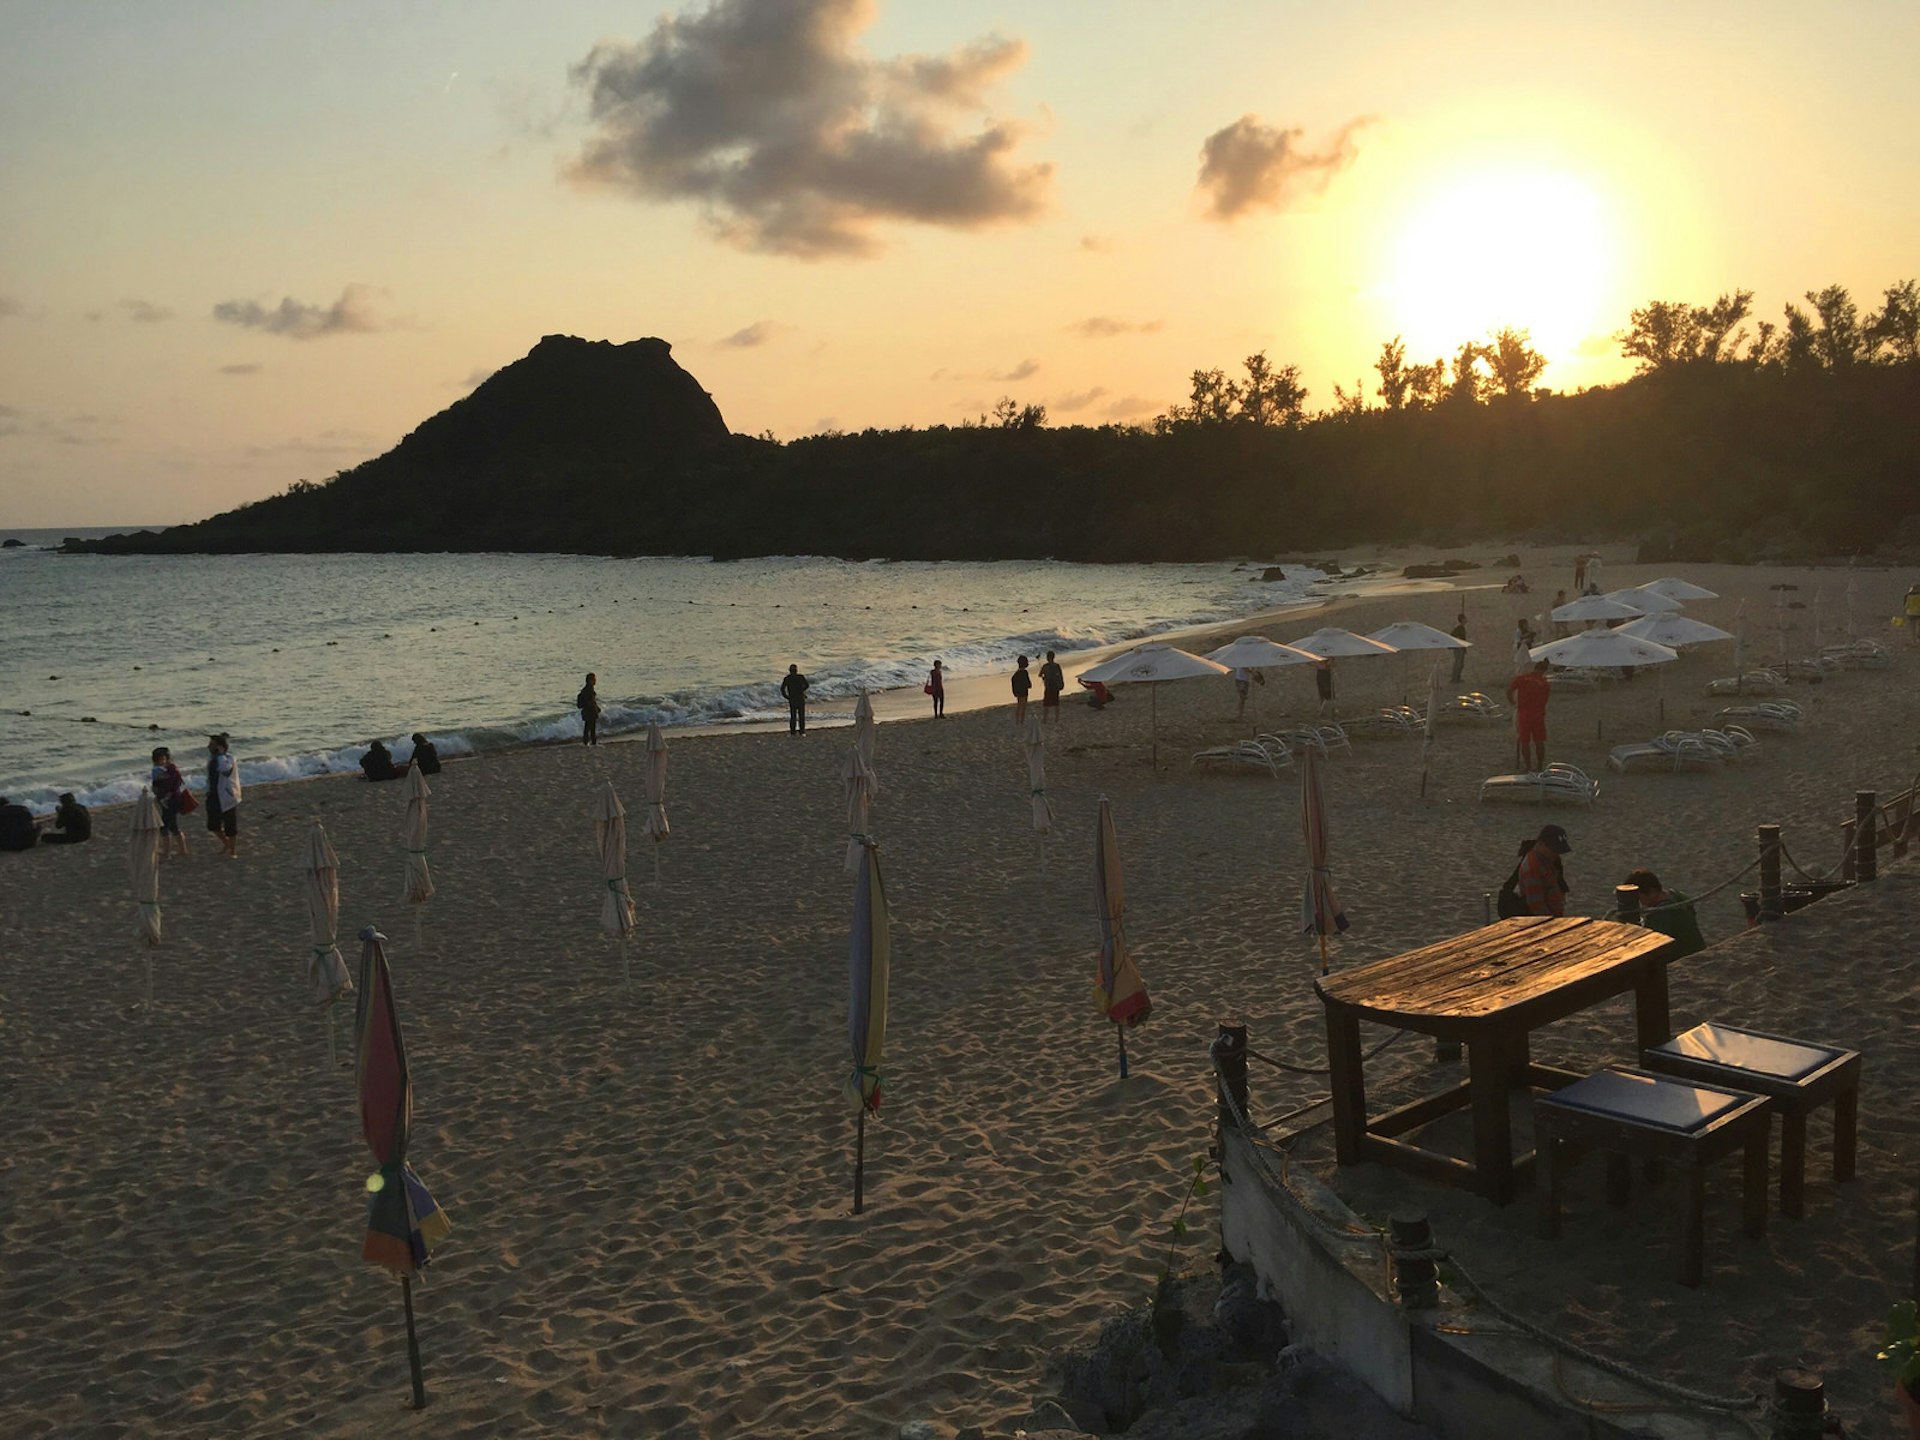 The sun sets over a small beach with a few people and some closed umbrellas. Superb swimming (and cocktails!), even in February, at Kenting's Little Bay Beach © Megan Eaves / Lonely Planet